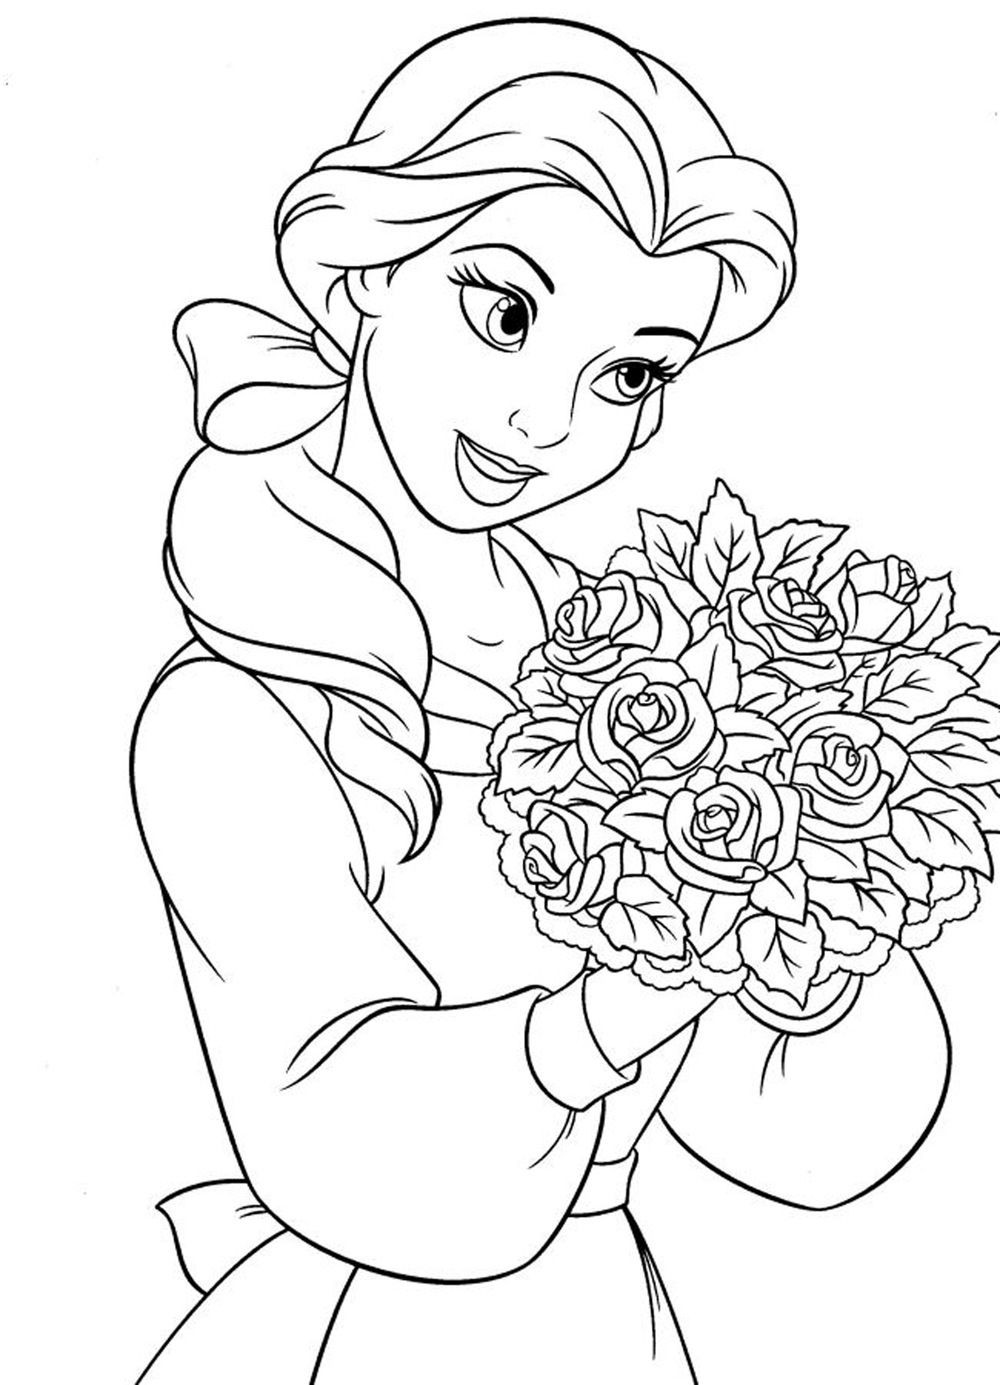 Girls Coloring Sheets
 Detailed Coloring Pages For Girls at GetColorings